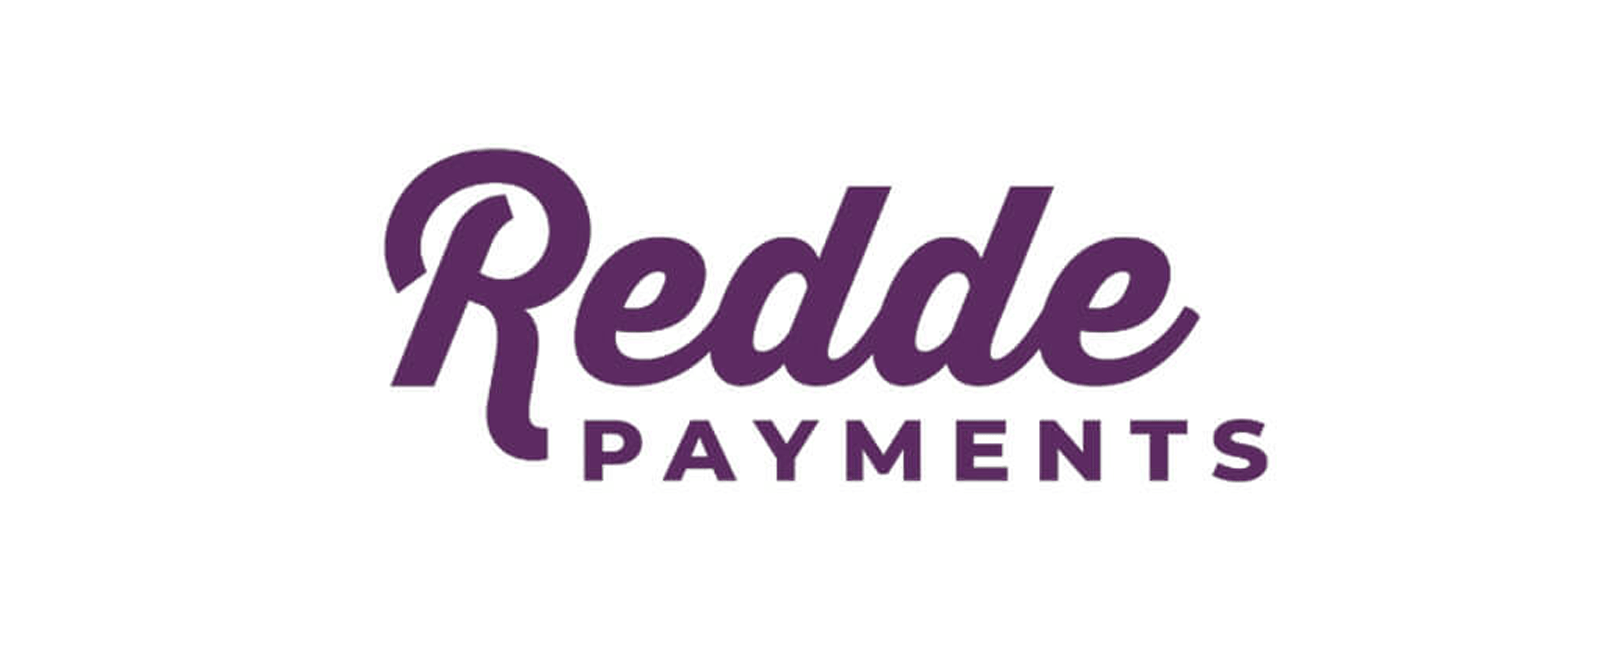 Insights From Chargebacks911® Featured on Redde Payments Blog